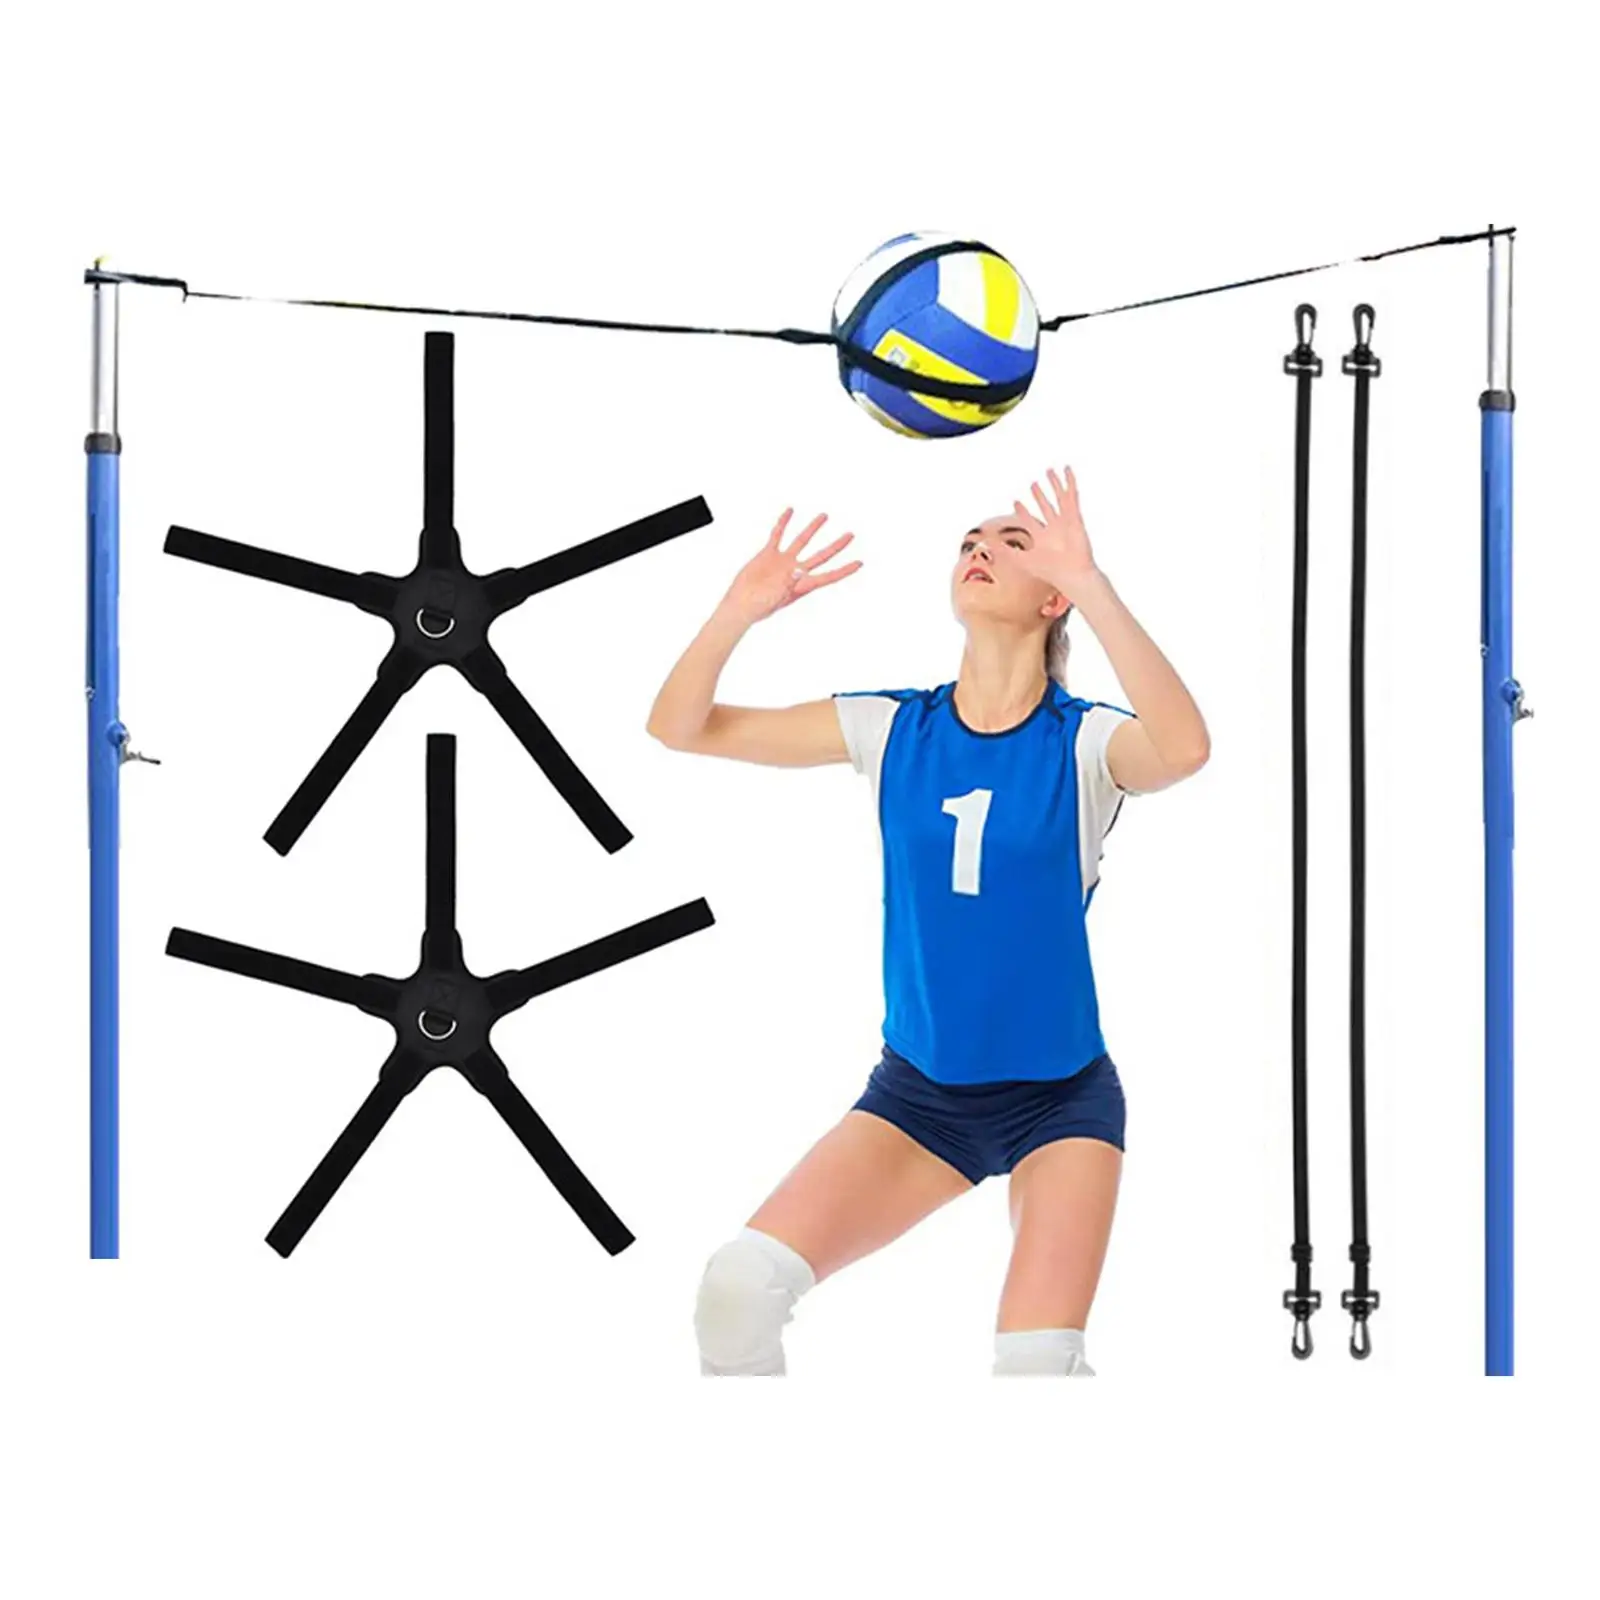 Volleyball Training Equipment Aid Solo Practice Gifts for Jumping Beginners